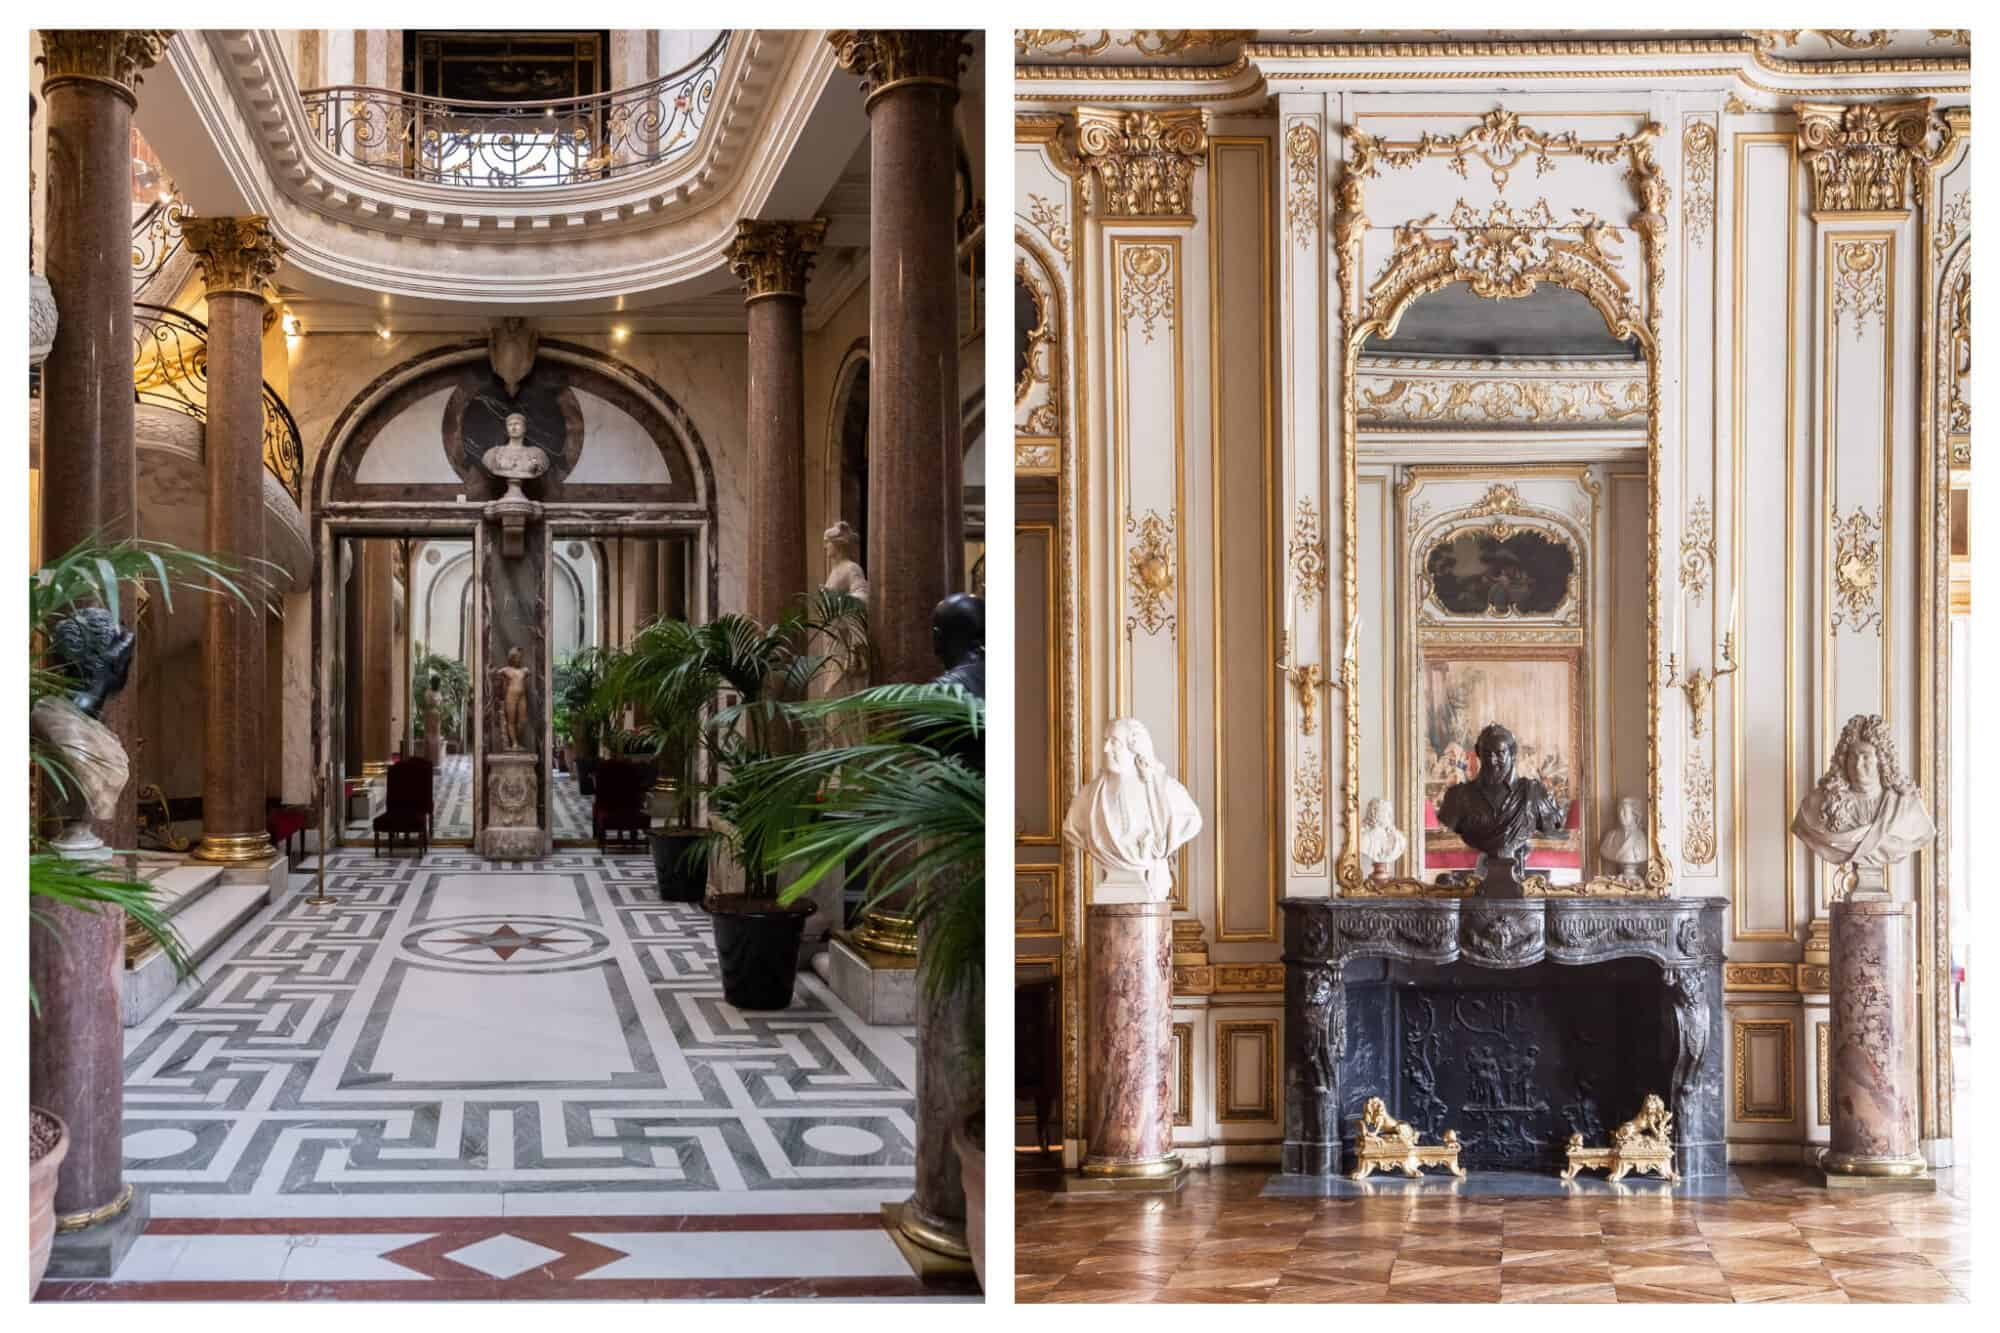 Left and right, the beautiful interiors of the Musée Jacquemart-André, which is an ornate hotel particulier in the 8th district of Paris.